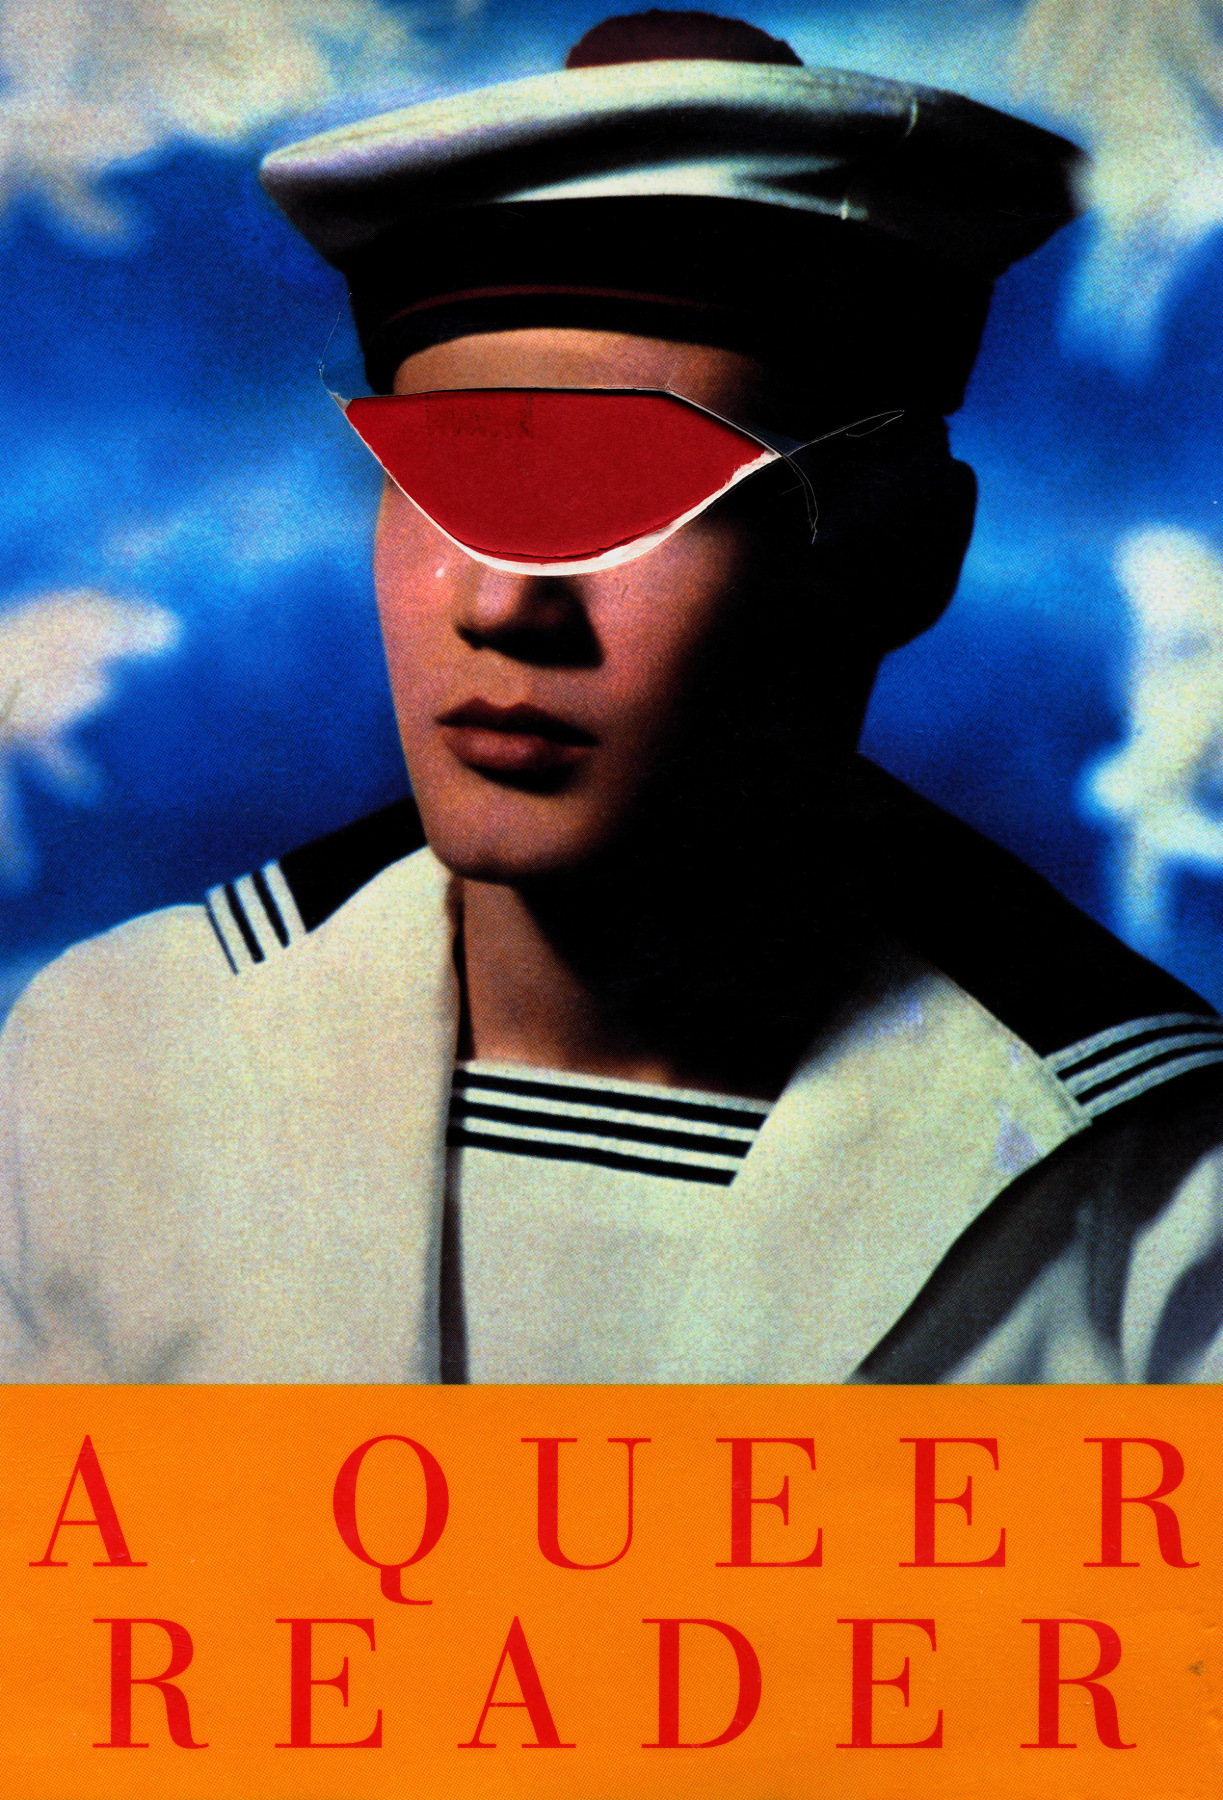 A Queer Reader, 2010, Archival inkjet print on Museo Silver Rag paper